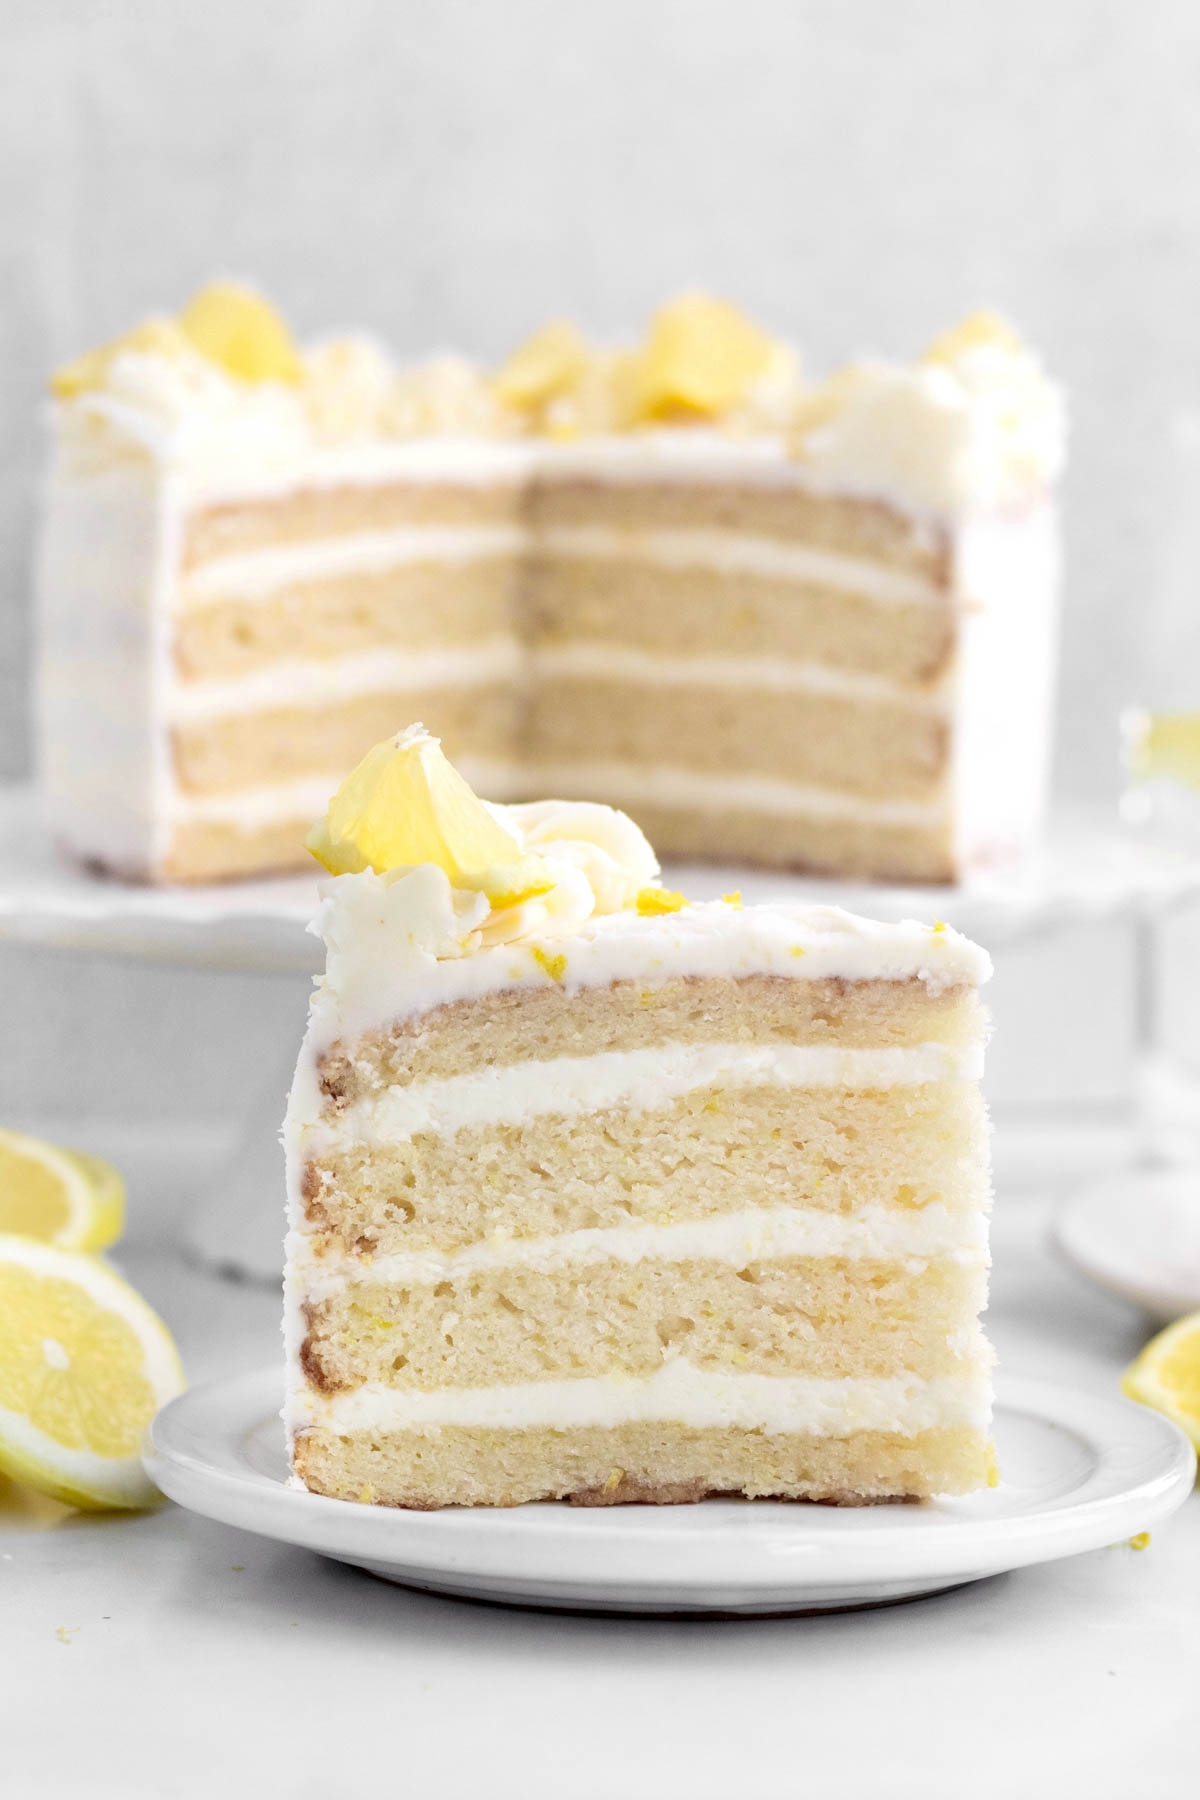 Slice of lemon cake in the foreground with the whole behind it.